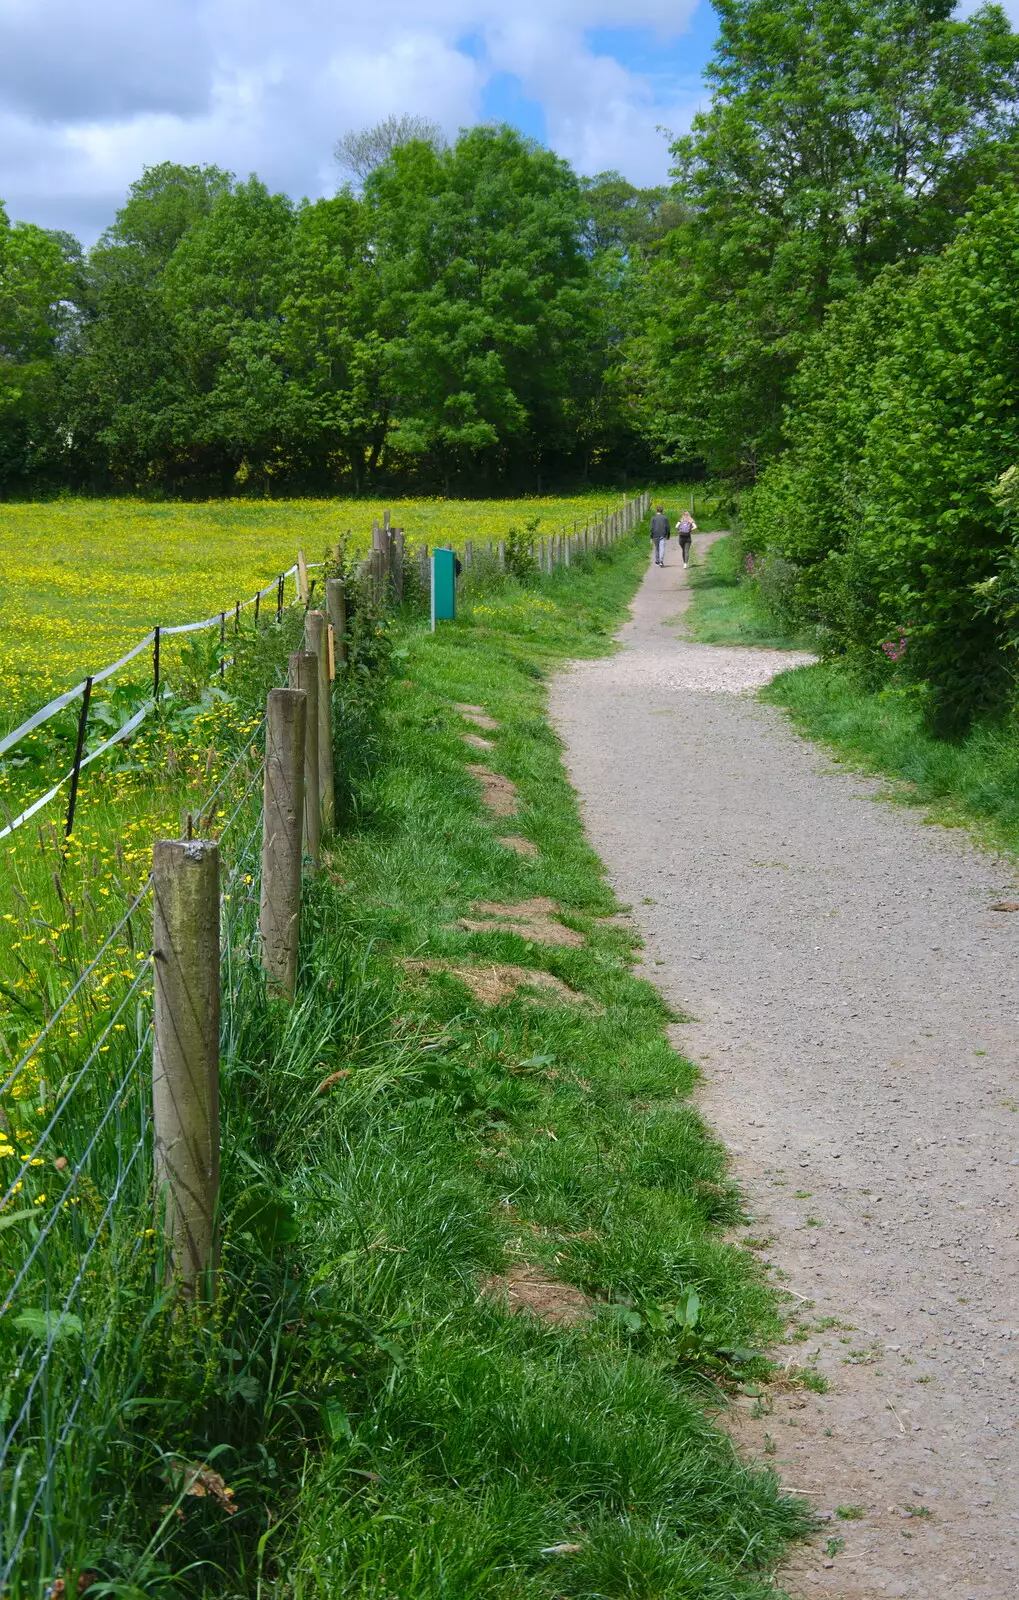 A nice path, from Chagford Lido and a Trip to Parke, Bovey Tracey, Devon - 25th May 2019